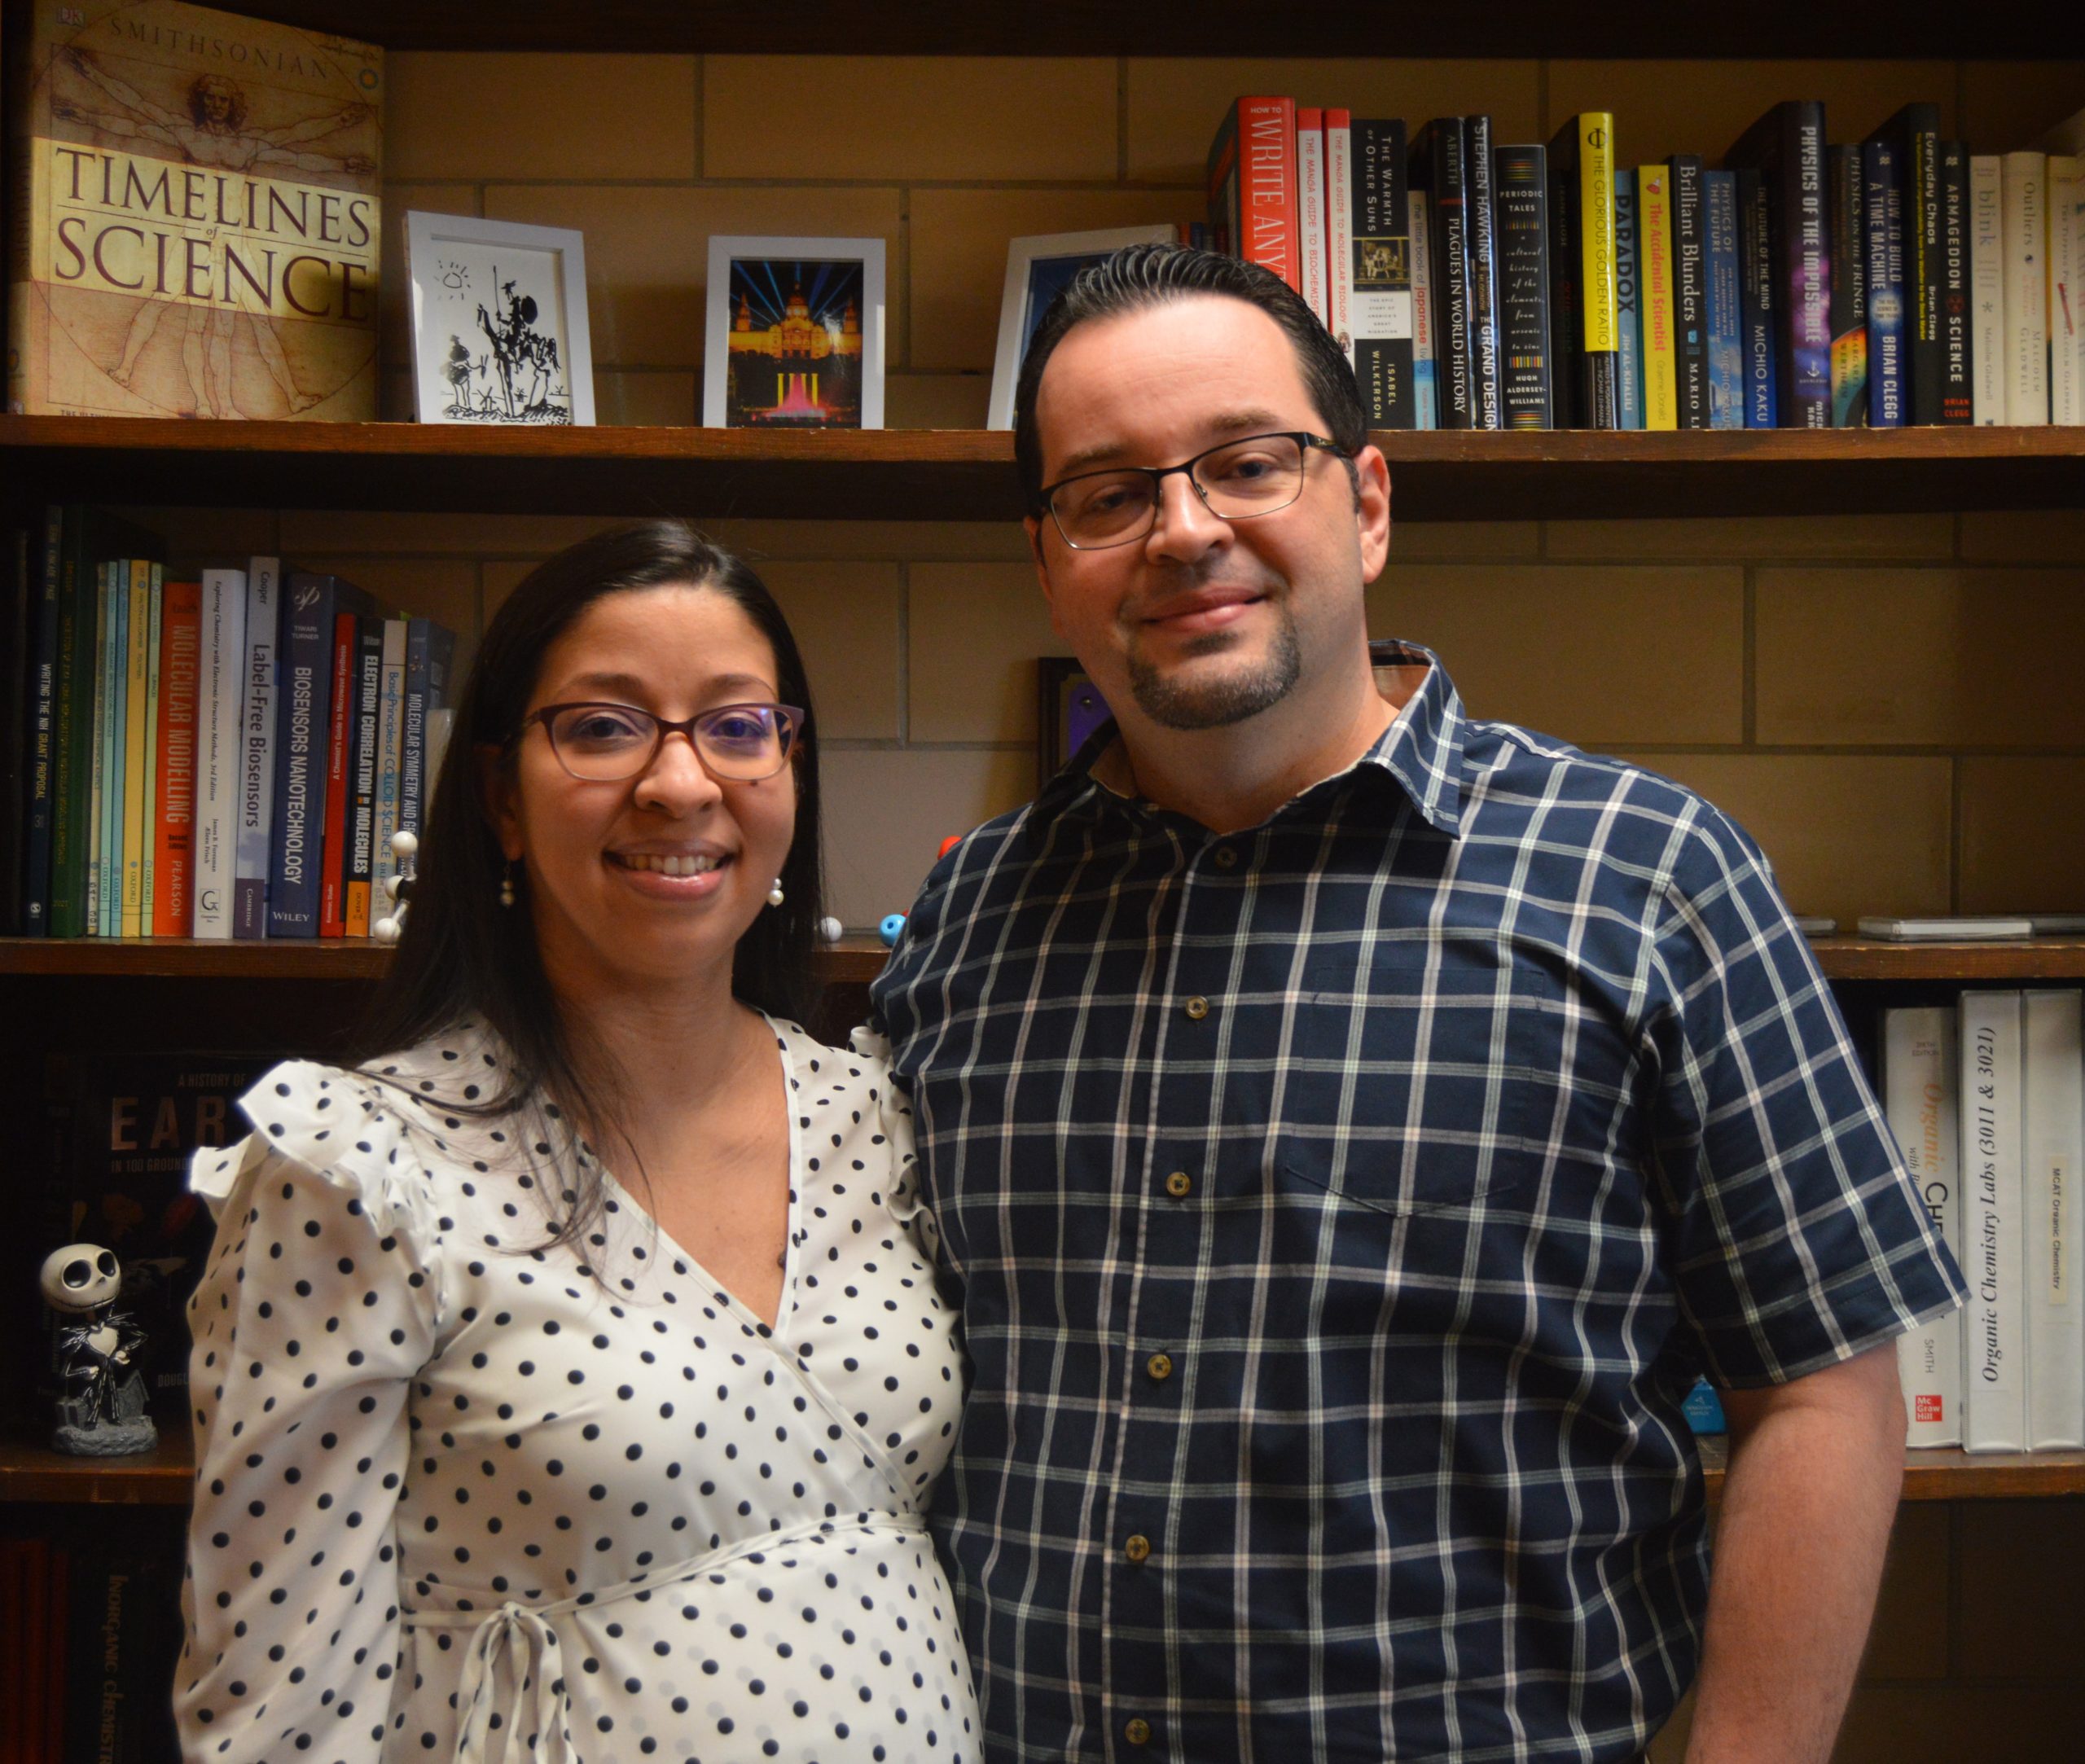 (L-R) Yohaselly Santiago Rodríguez and Daniel Rivera Vázquez are married professors at NSU who love sharing their heritage.